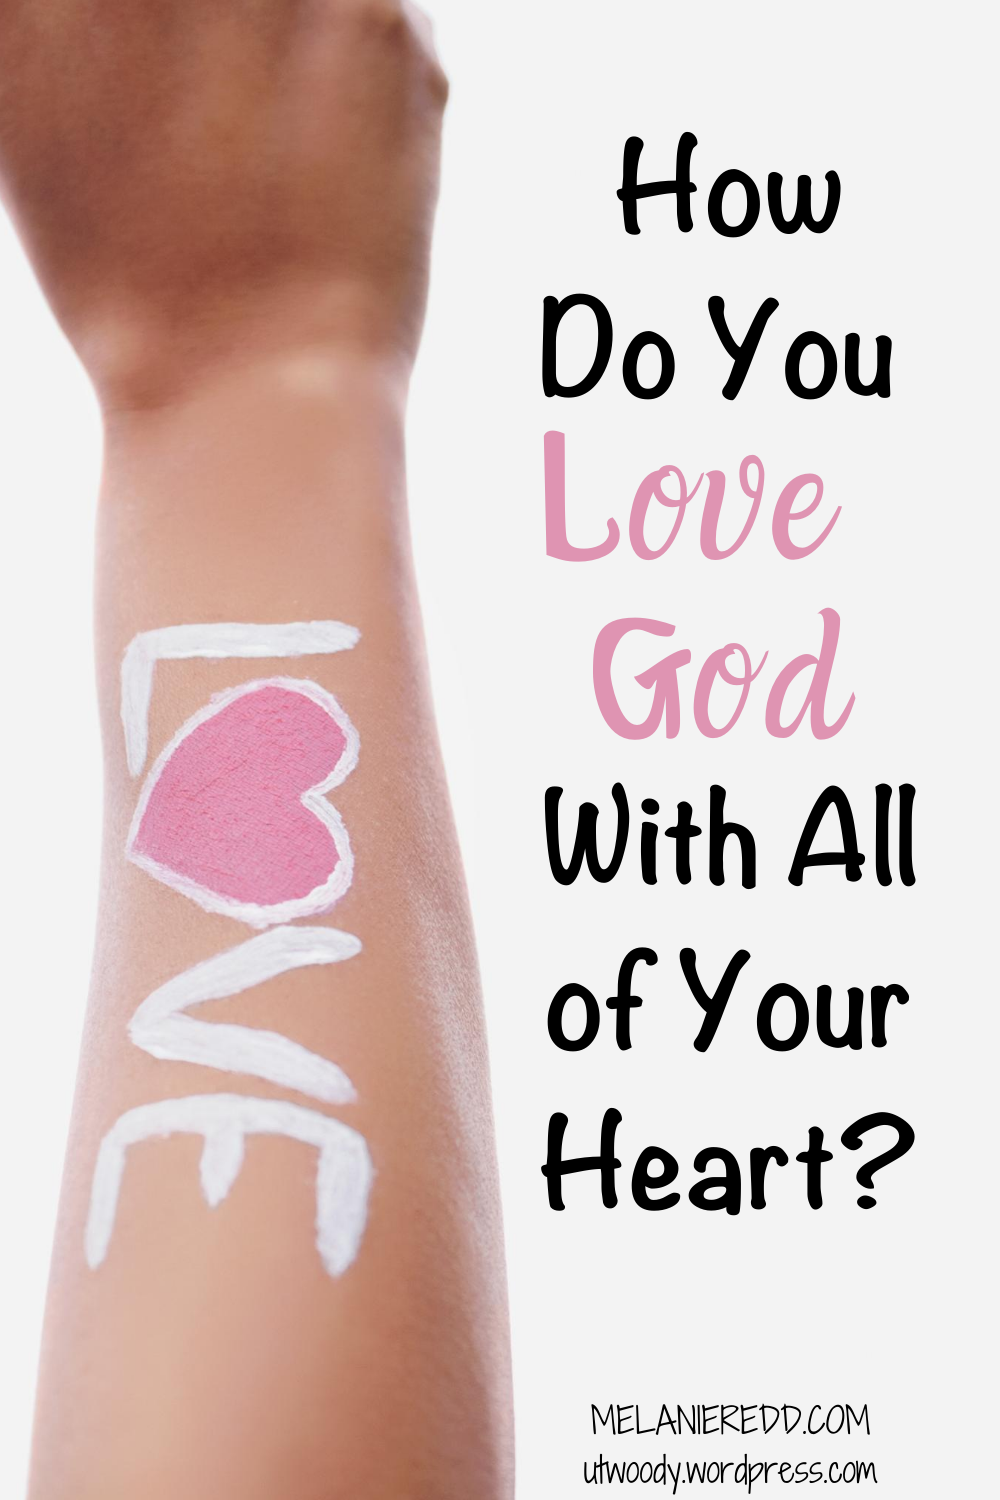 Would you like to have a closer relationship with the Lord? Know Him more? And, how do you love God with all of your heart? Can this really be done? Why not drop by the blog today and learn more? #lovegod #closertogod #lovethelord